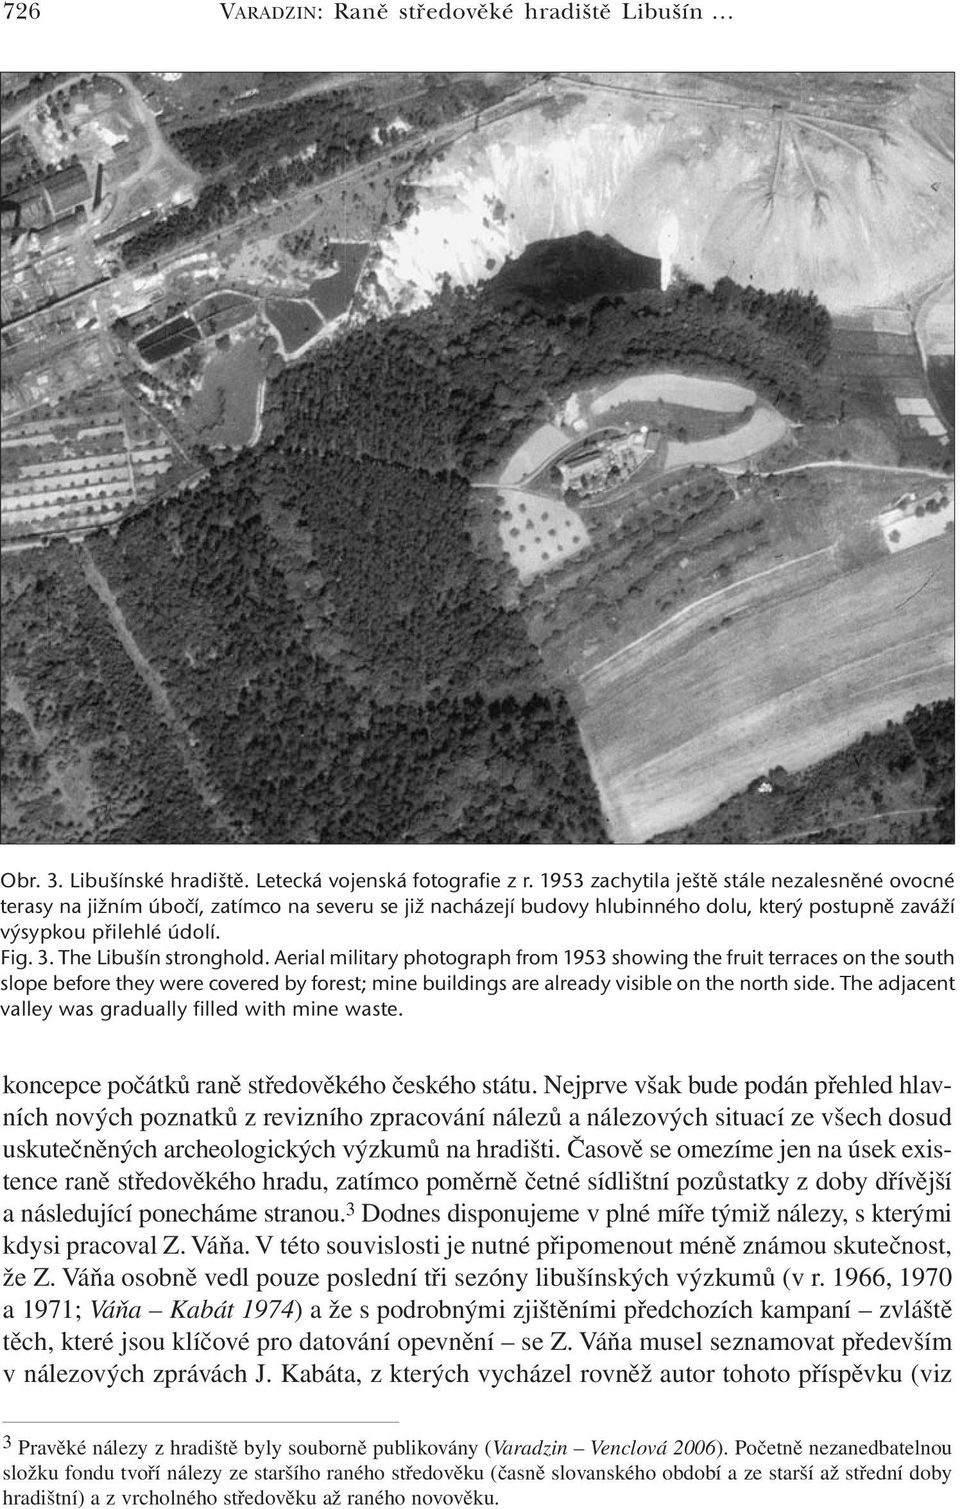 The Libušín stronghold. Aerial military photograph from 1953 showing the fruit terraces on the south slope before they were covered by forest; mine buildings are already visible on the north side.